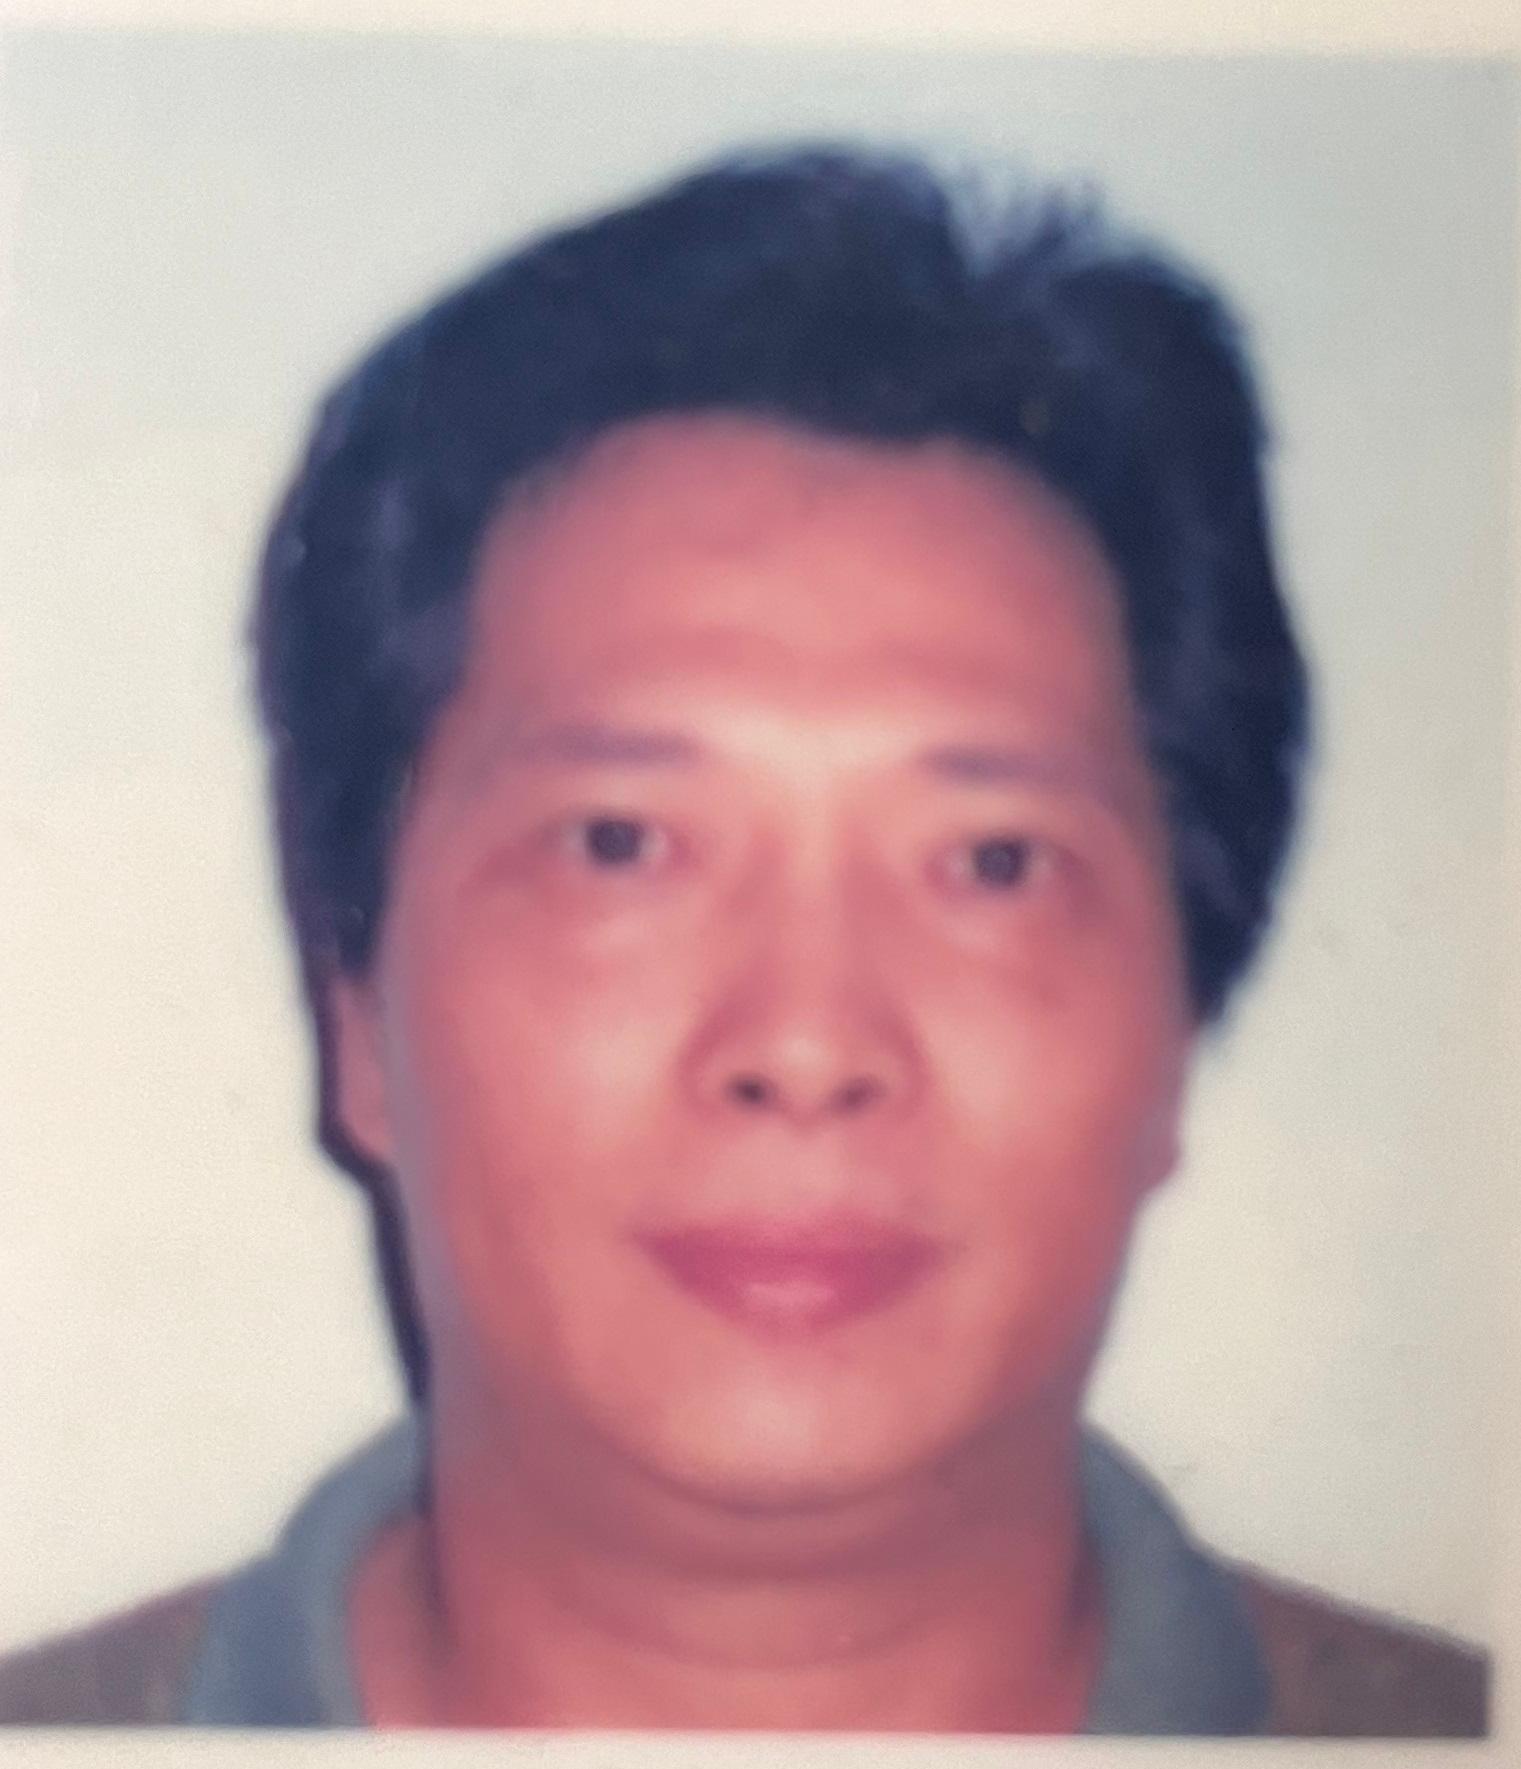 Lam Chi-hung, aged 63, is about 1.65 metres tall, 68 kilograms in weight and of medium build. He has a round face with yellow complexion and short grey hair. He was last seen wearing a white short-sleeved polo shirt, blue short jeans and grey sports shoes.